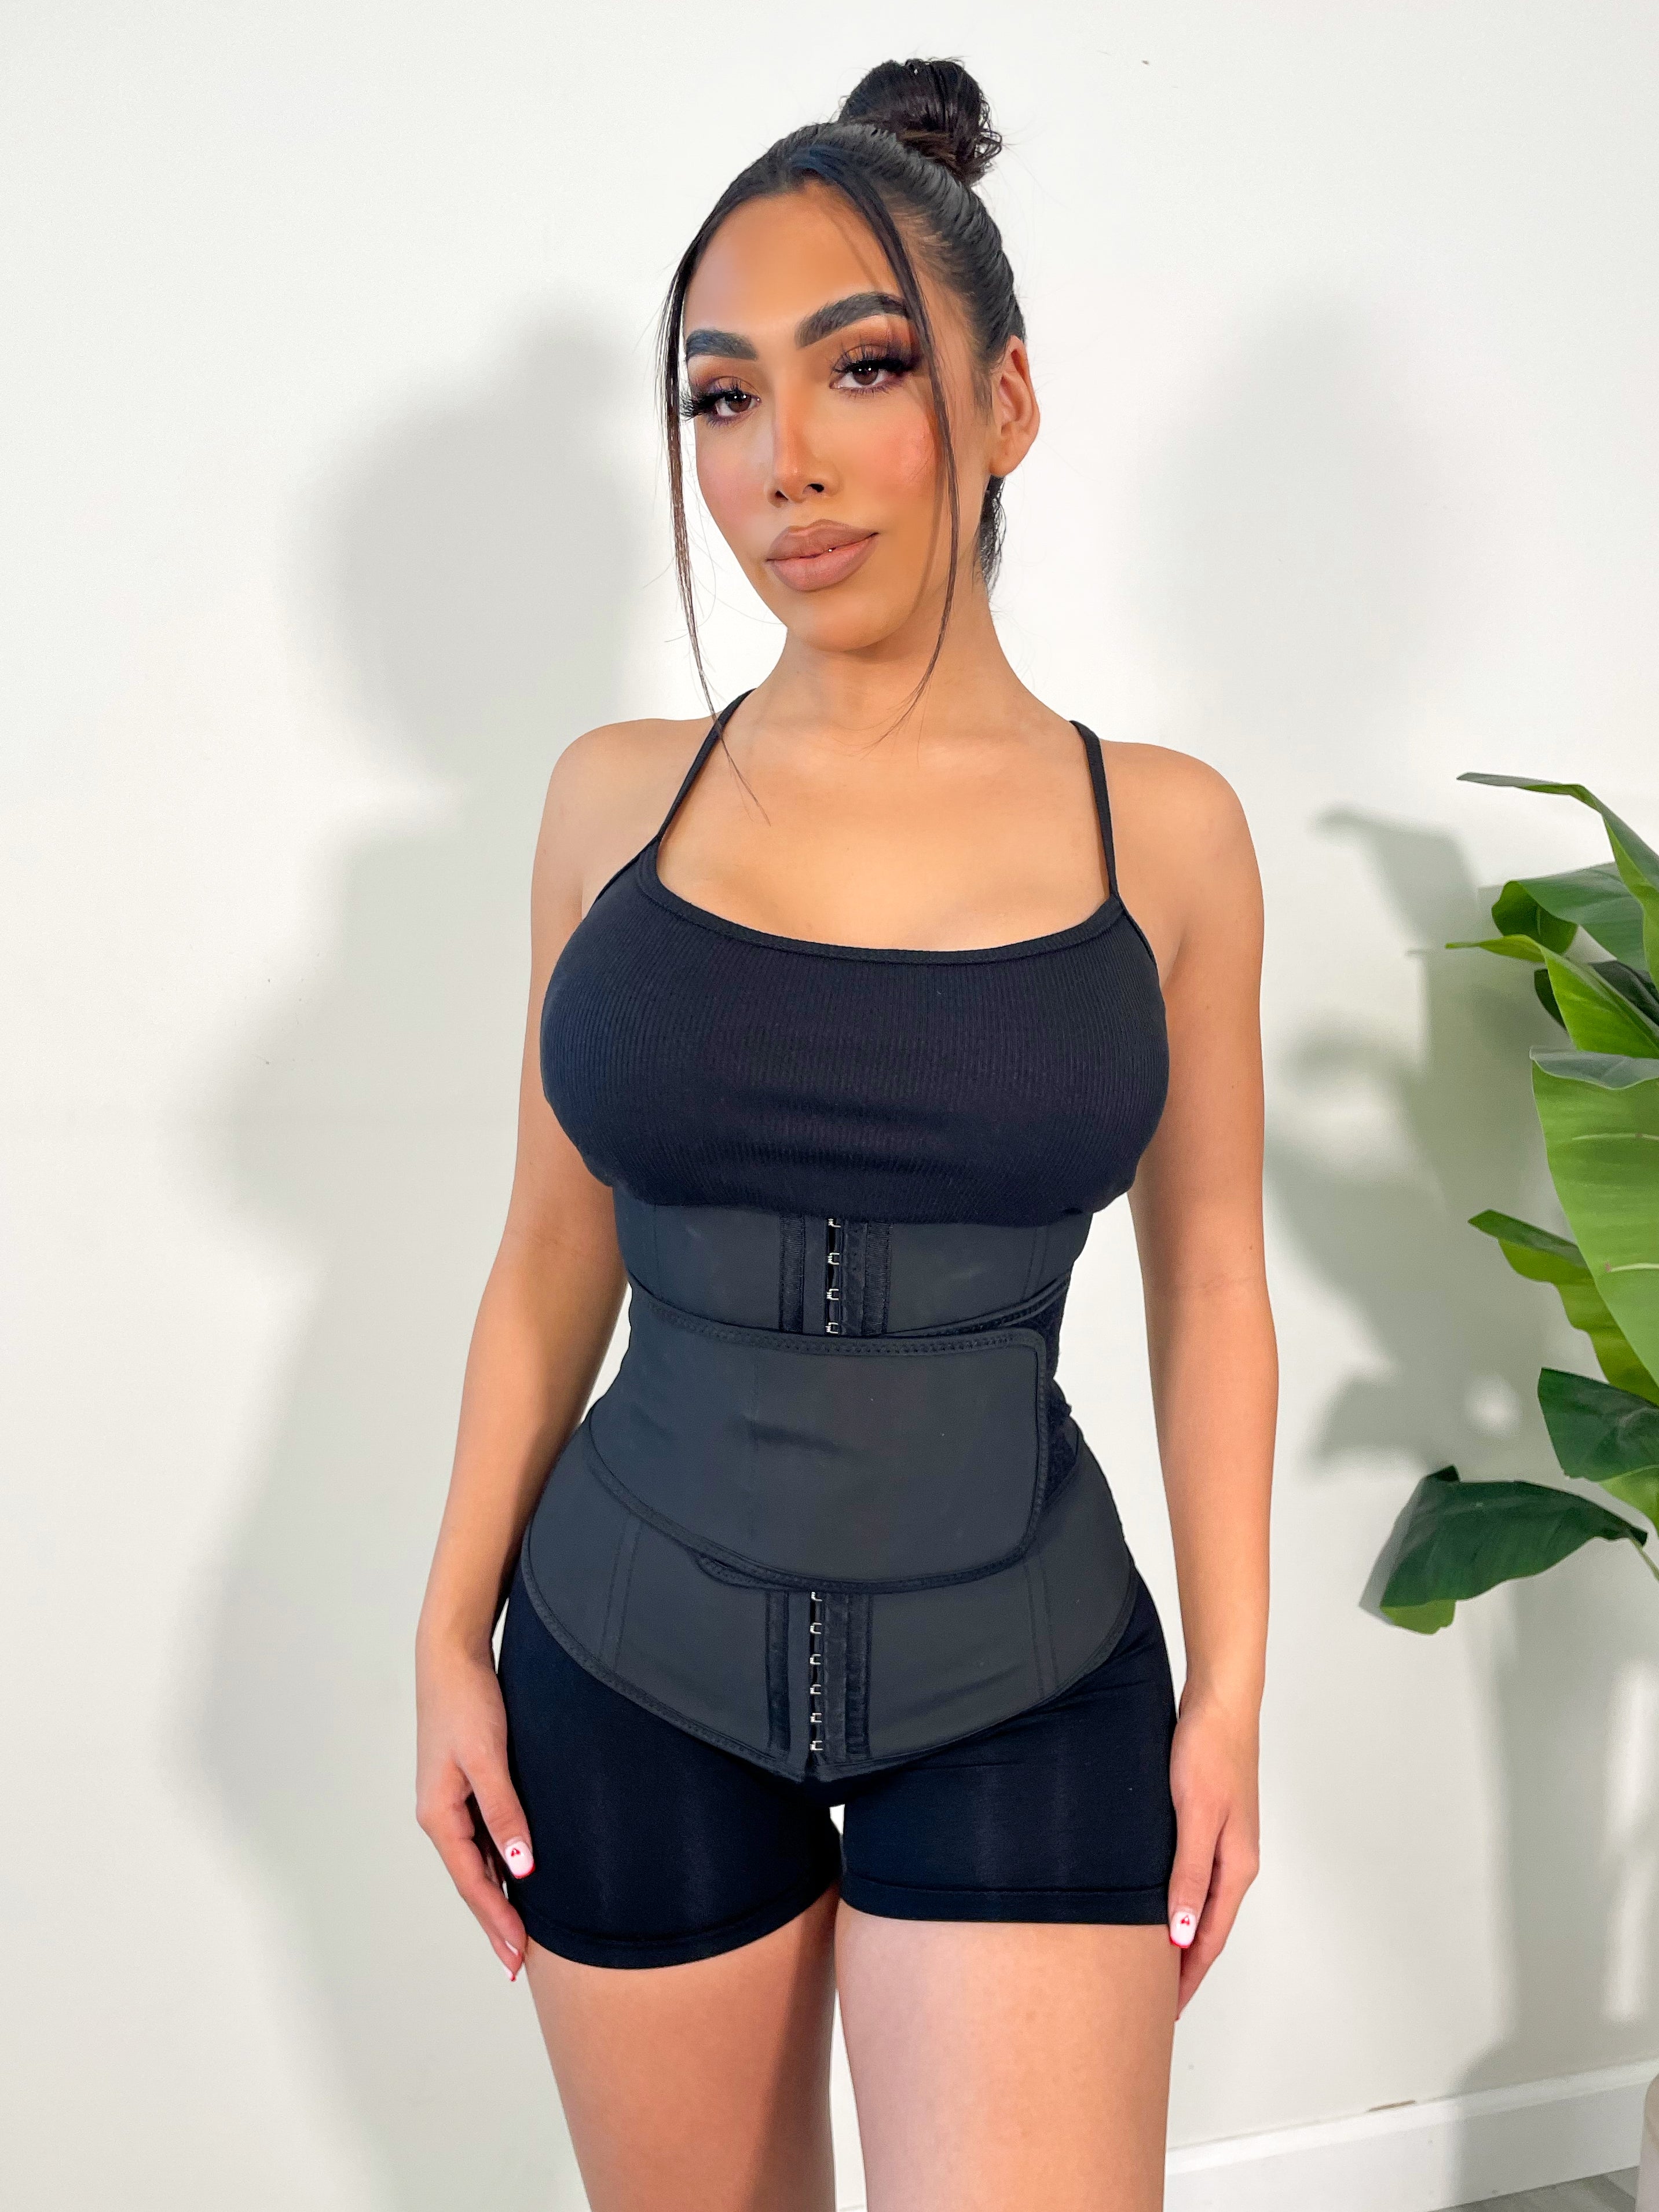 Stella's Corset - Instantly Slimming Orthopaedic Solutions